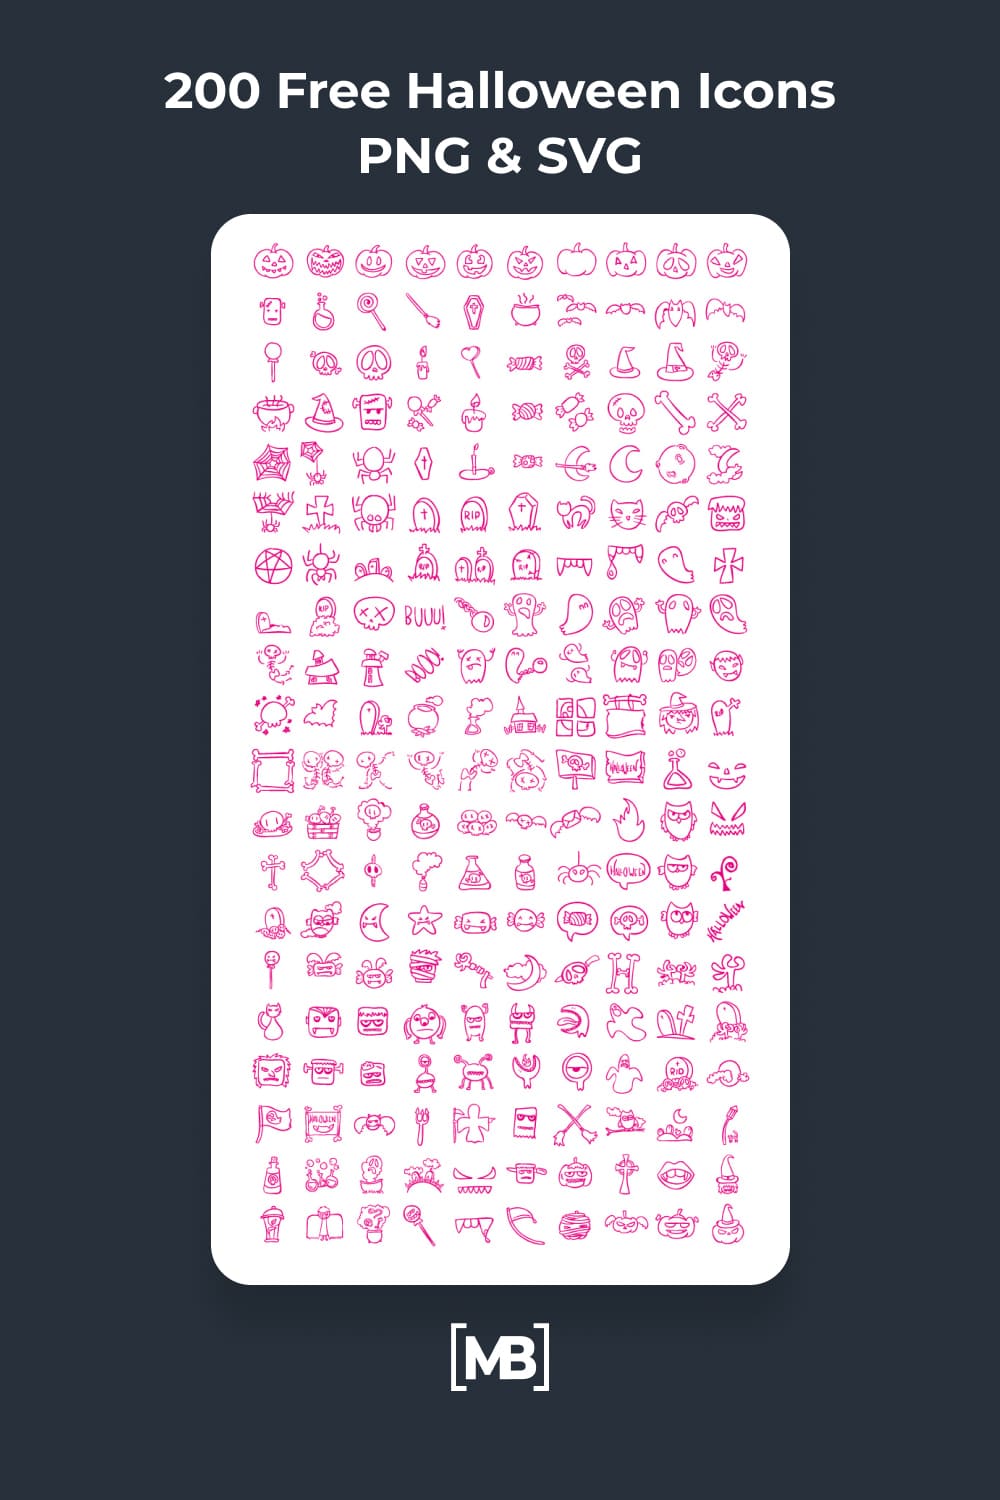 28 200 Free Halloween Icons PNG SVG.